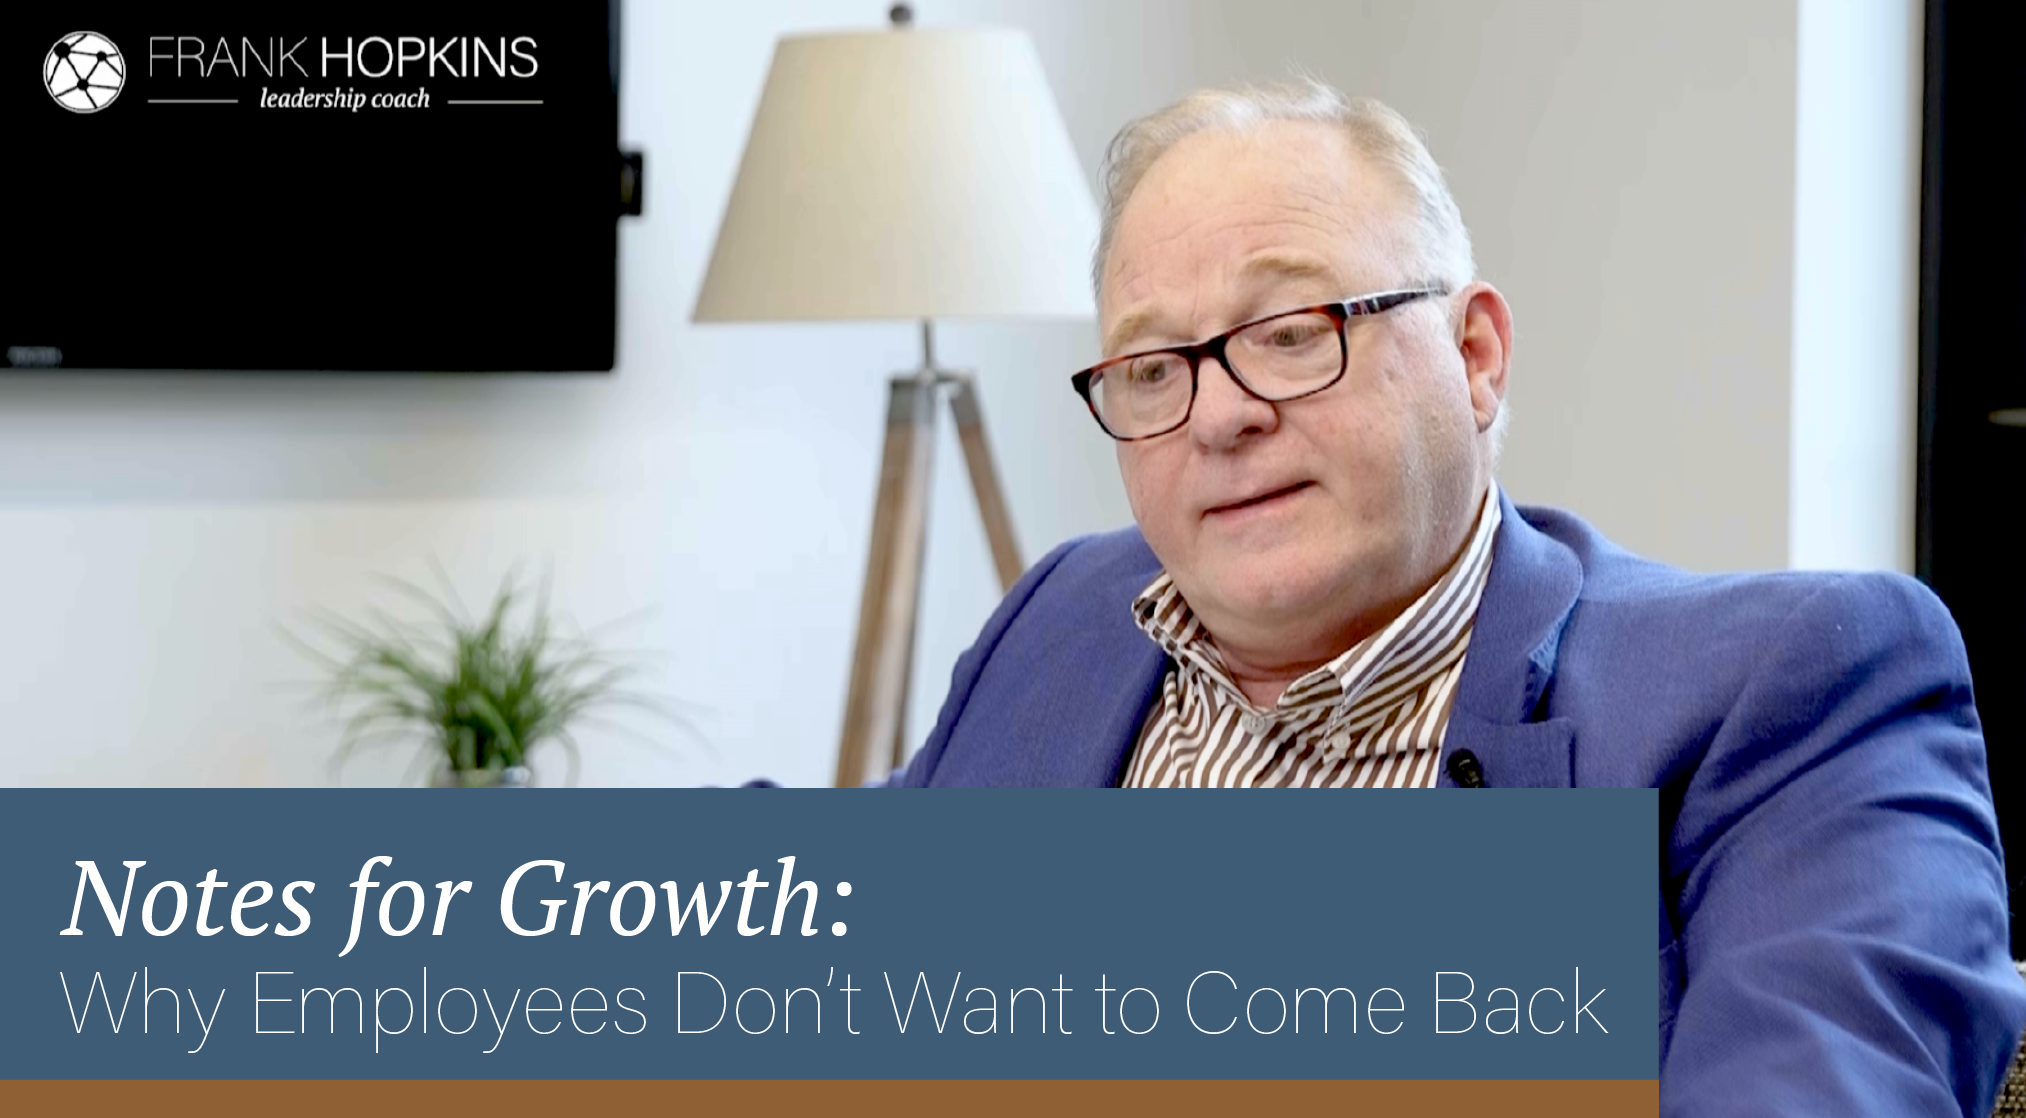 Notes for Growth: Why Employees Don't Want to Come Back